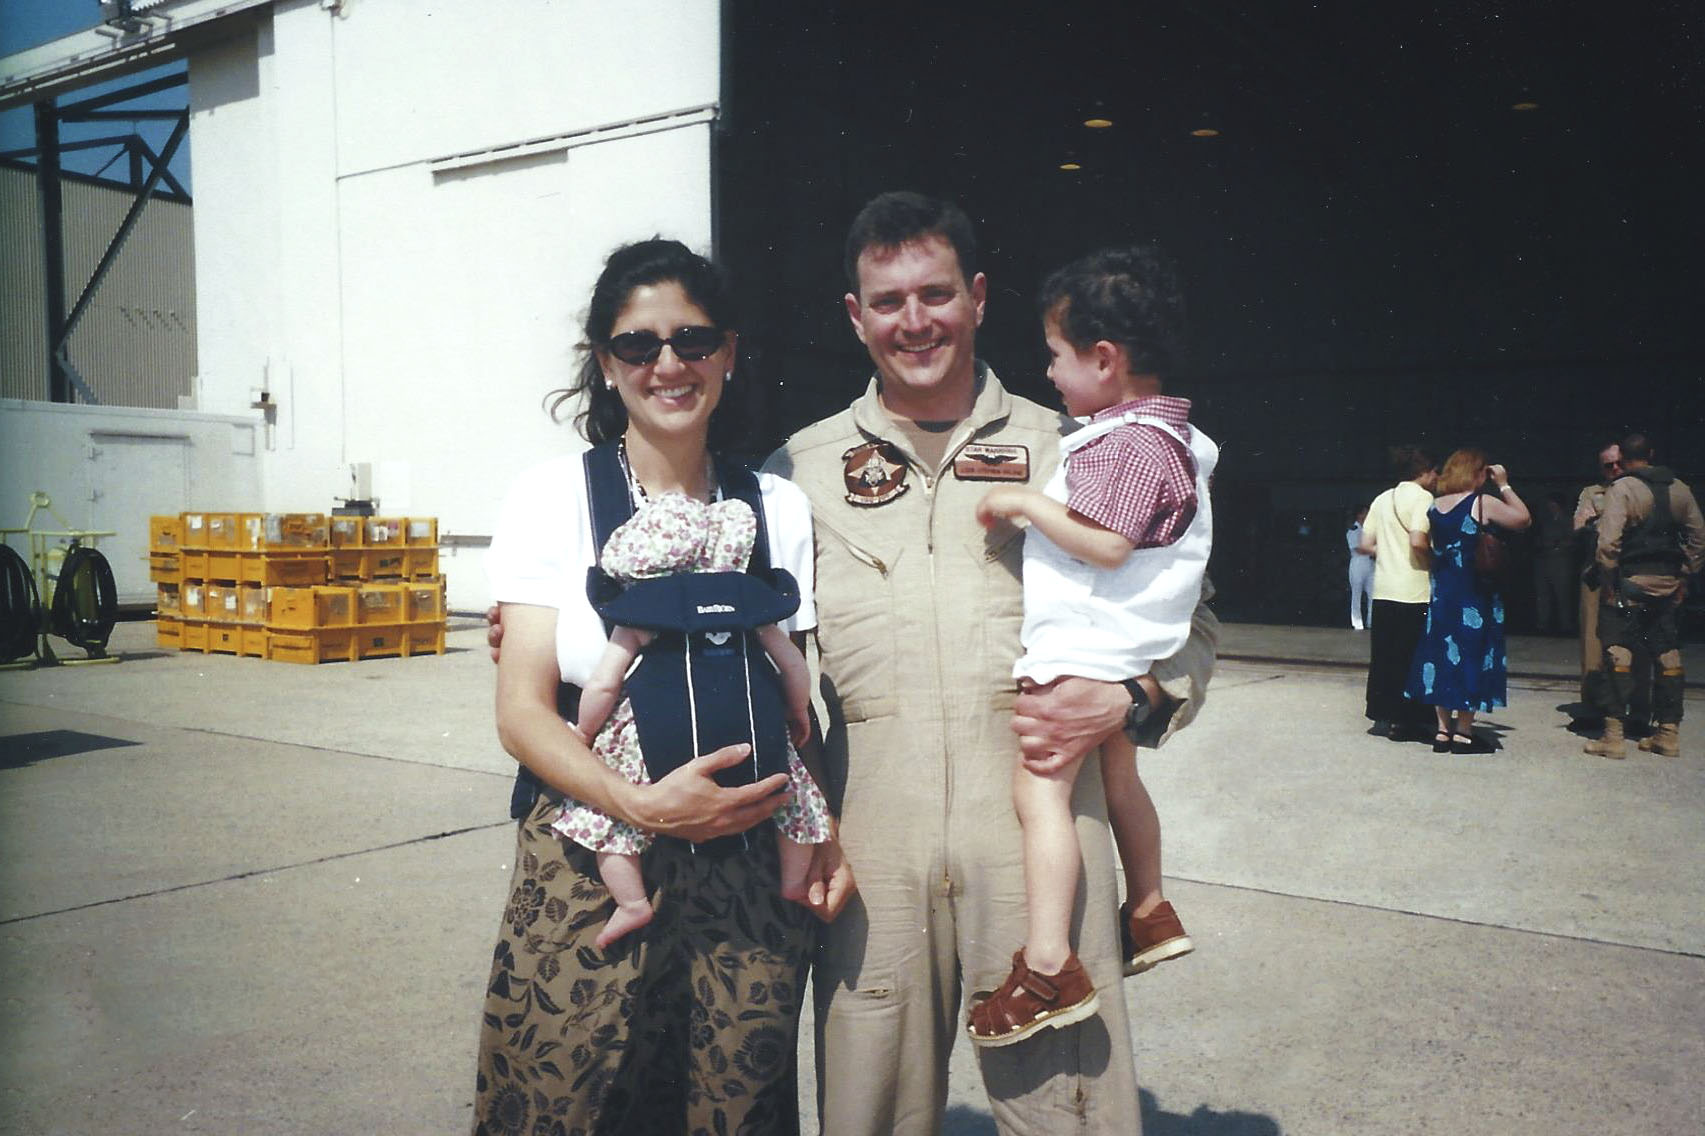 Steve Milone, with his wife Jasmine and their two children at Andrews Air Force base